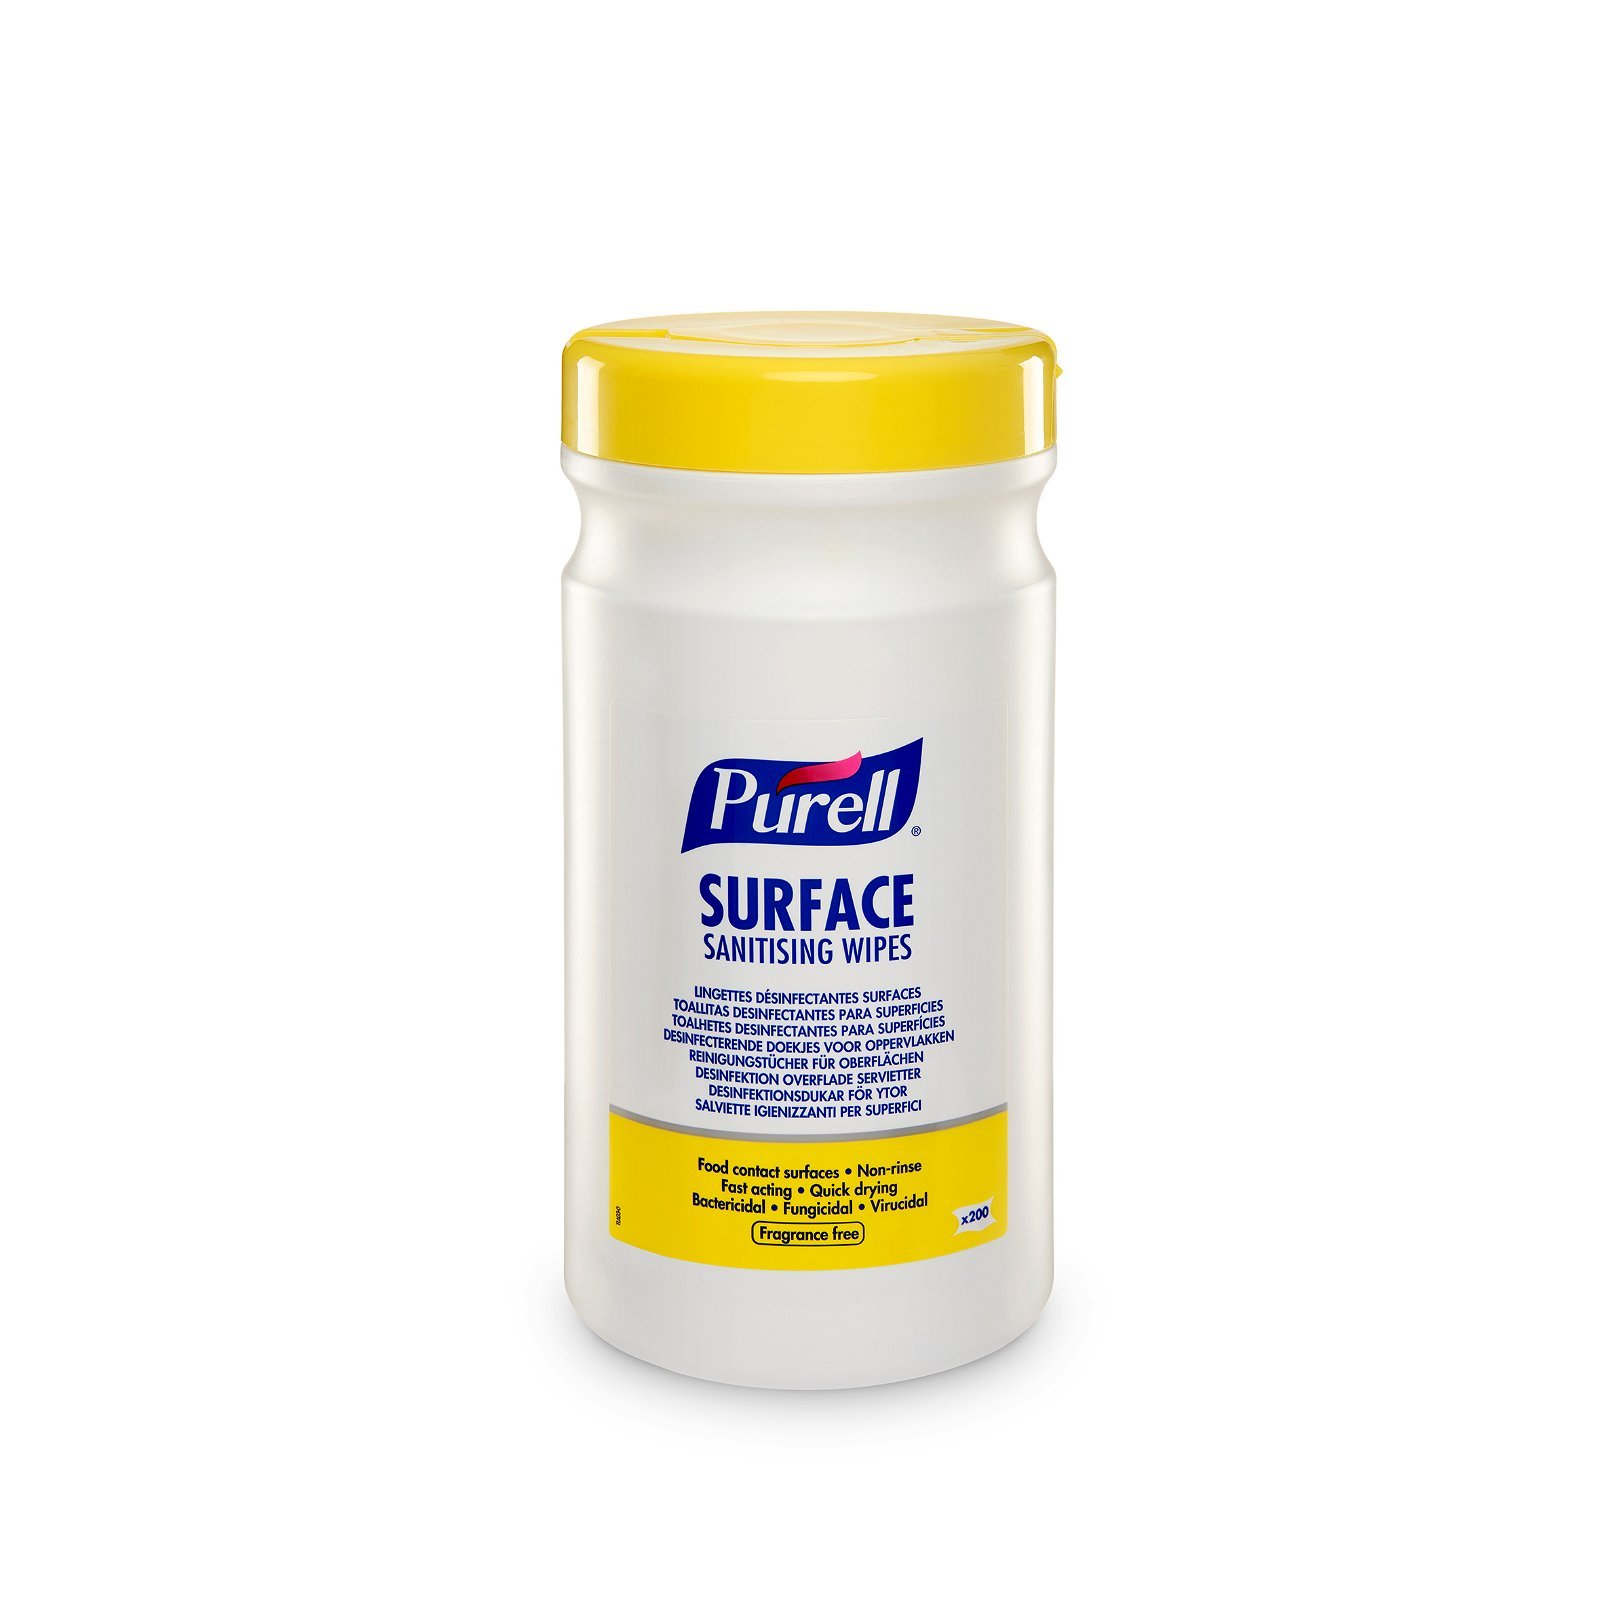 Purell desinfektions wipes